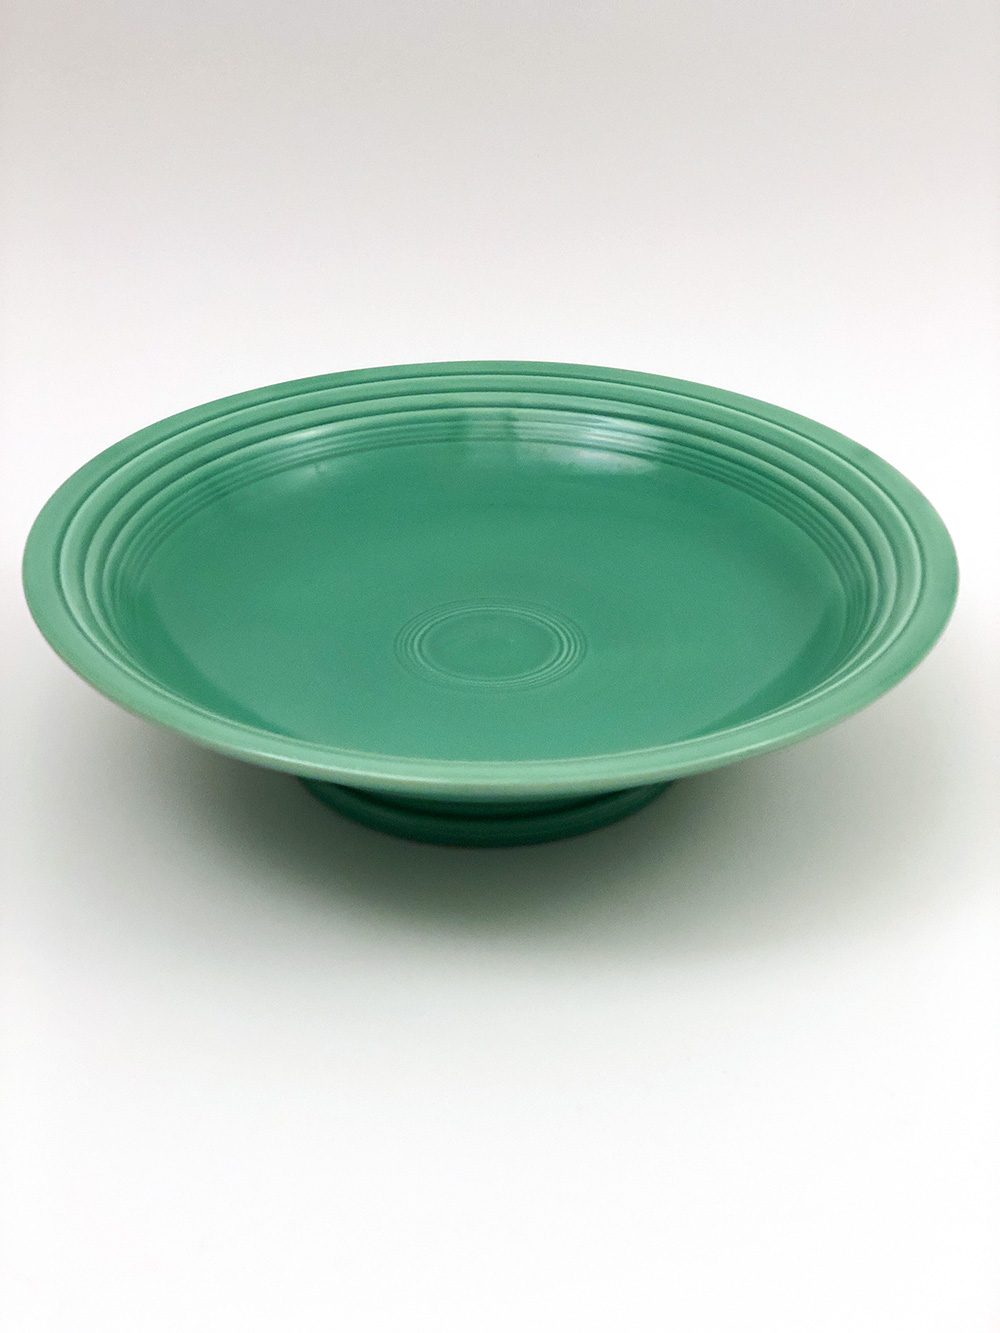 green vintage fiesta 12 inch footed comport for sale